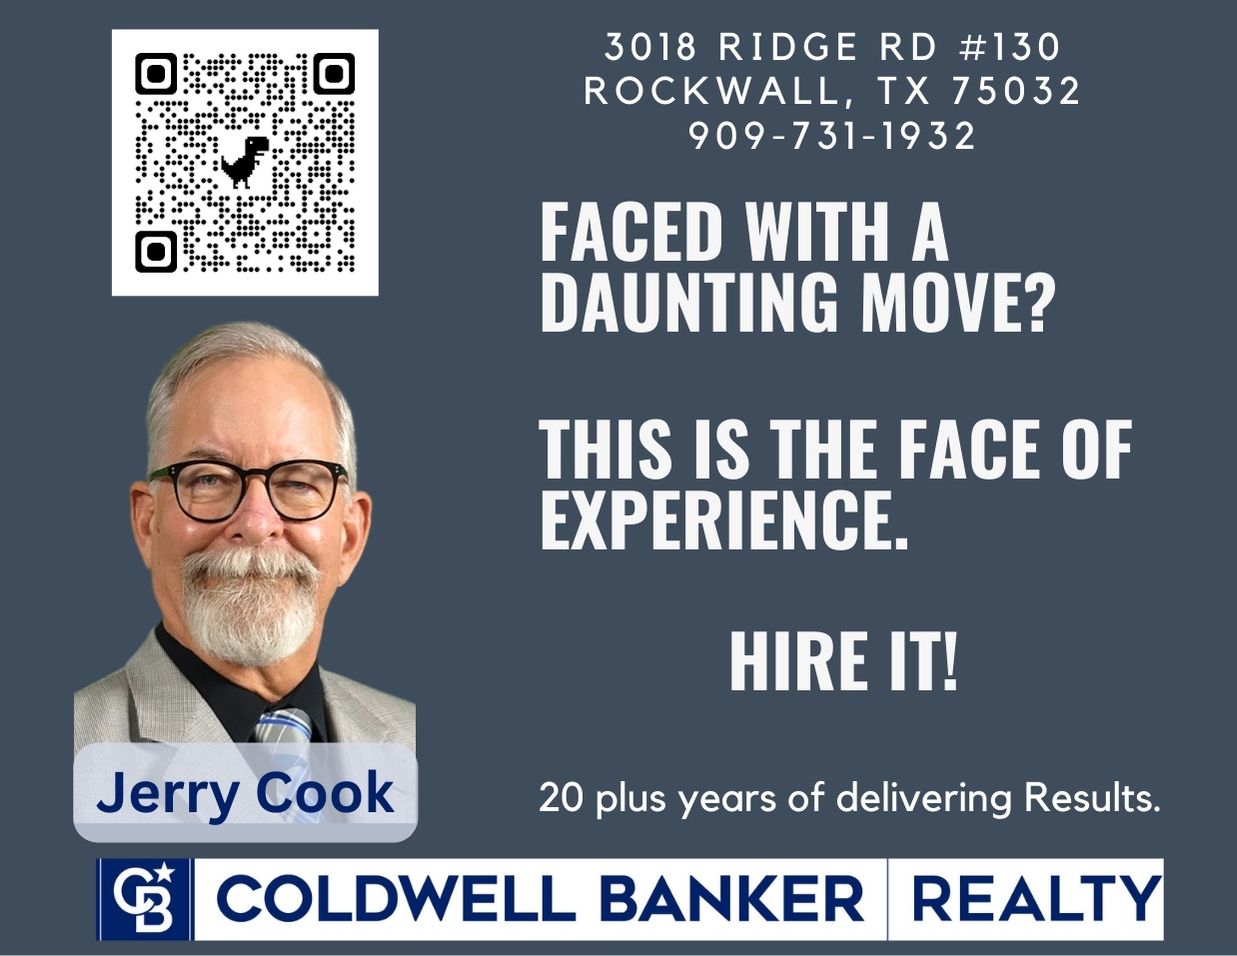 Jerry Cook Realtor